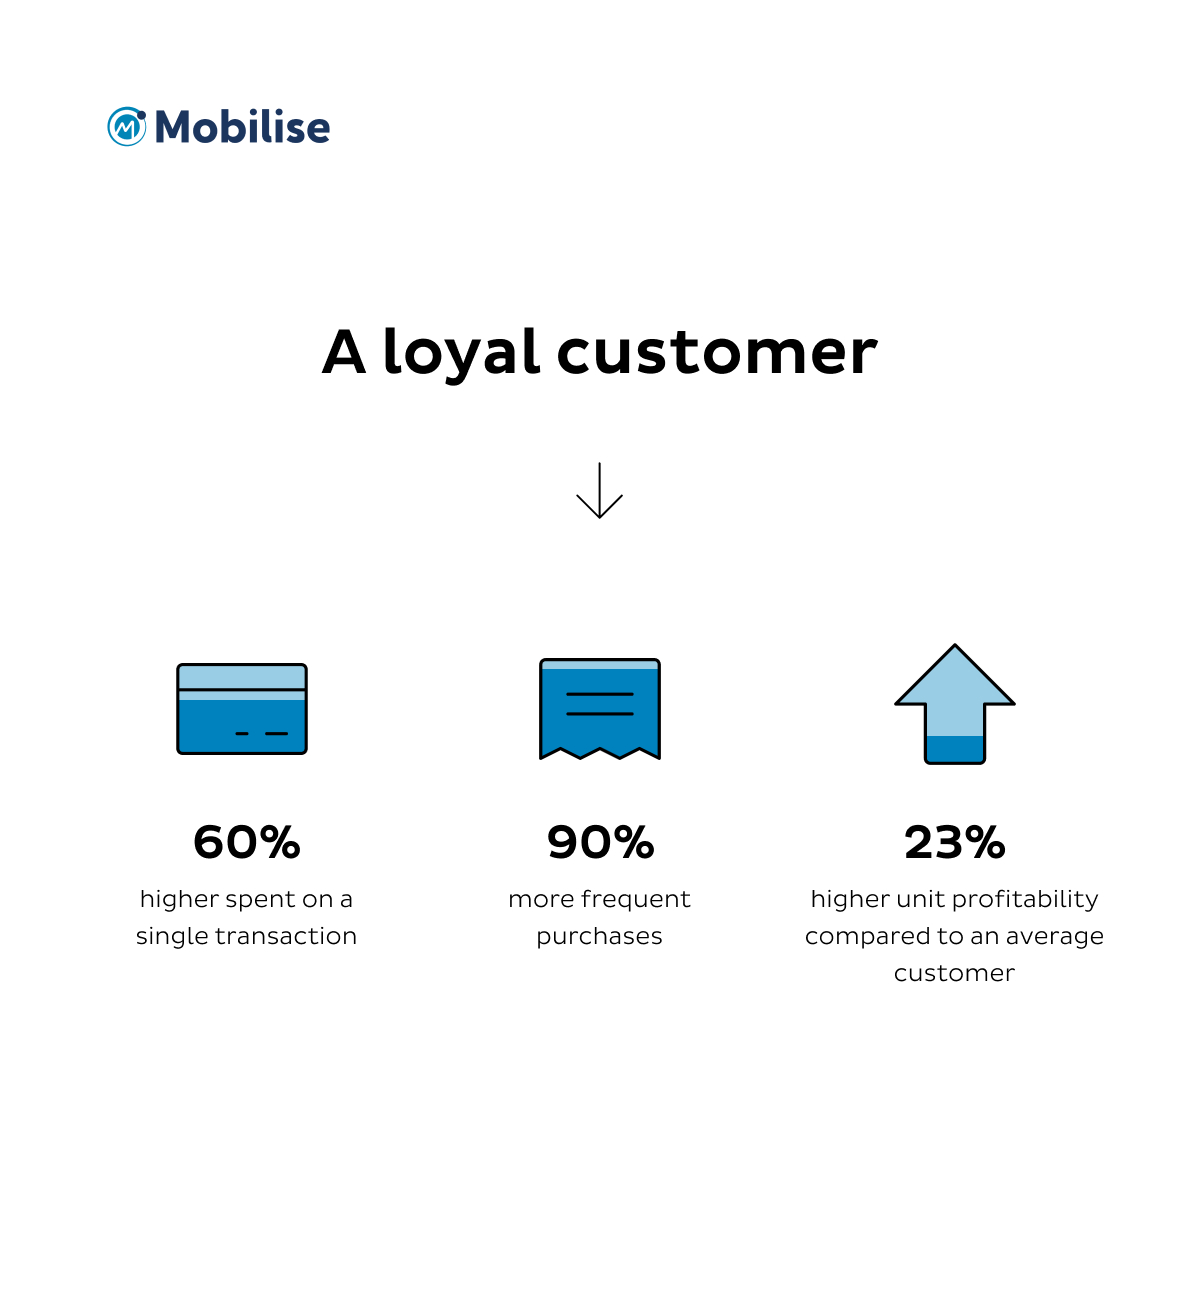 Loyal customers spend higher on a single transaction, purchase more frequently and also has a higher unit profitability compared to an average customer.